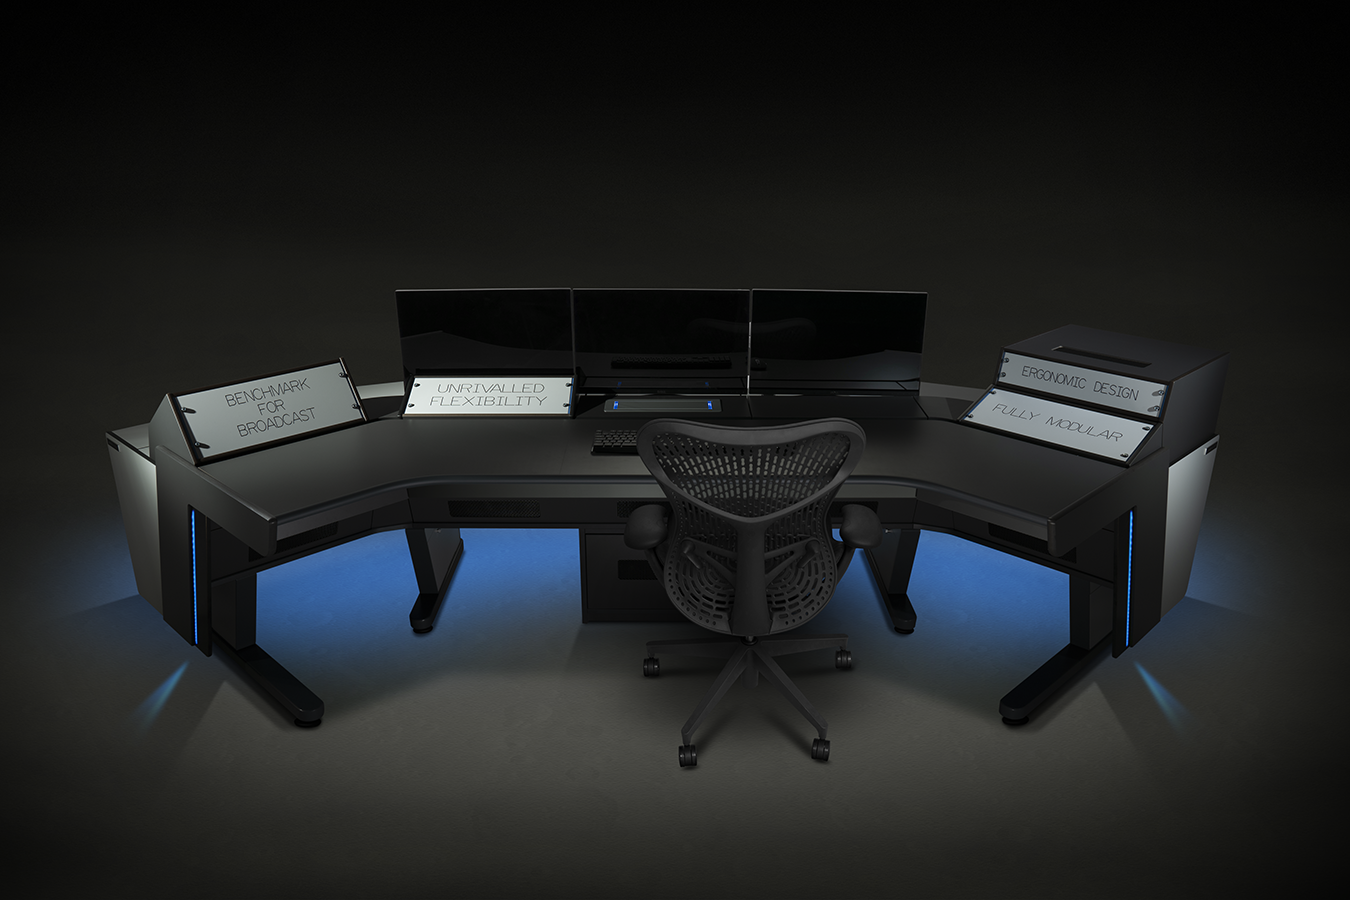 E-type Fixed Height Wide Chair, Ergonomic, fully modular console desk chair.